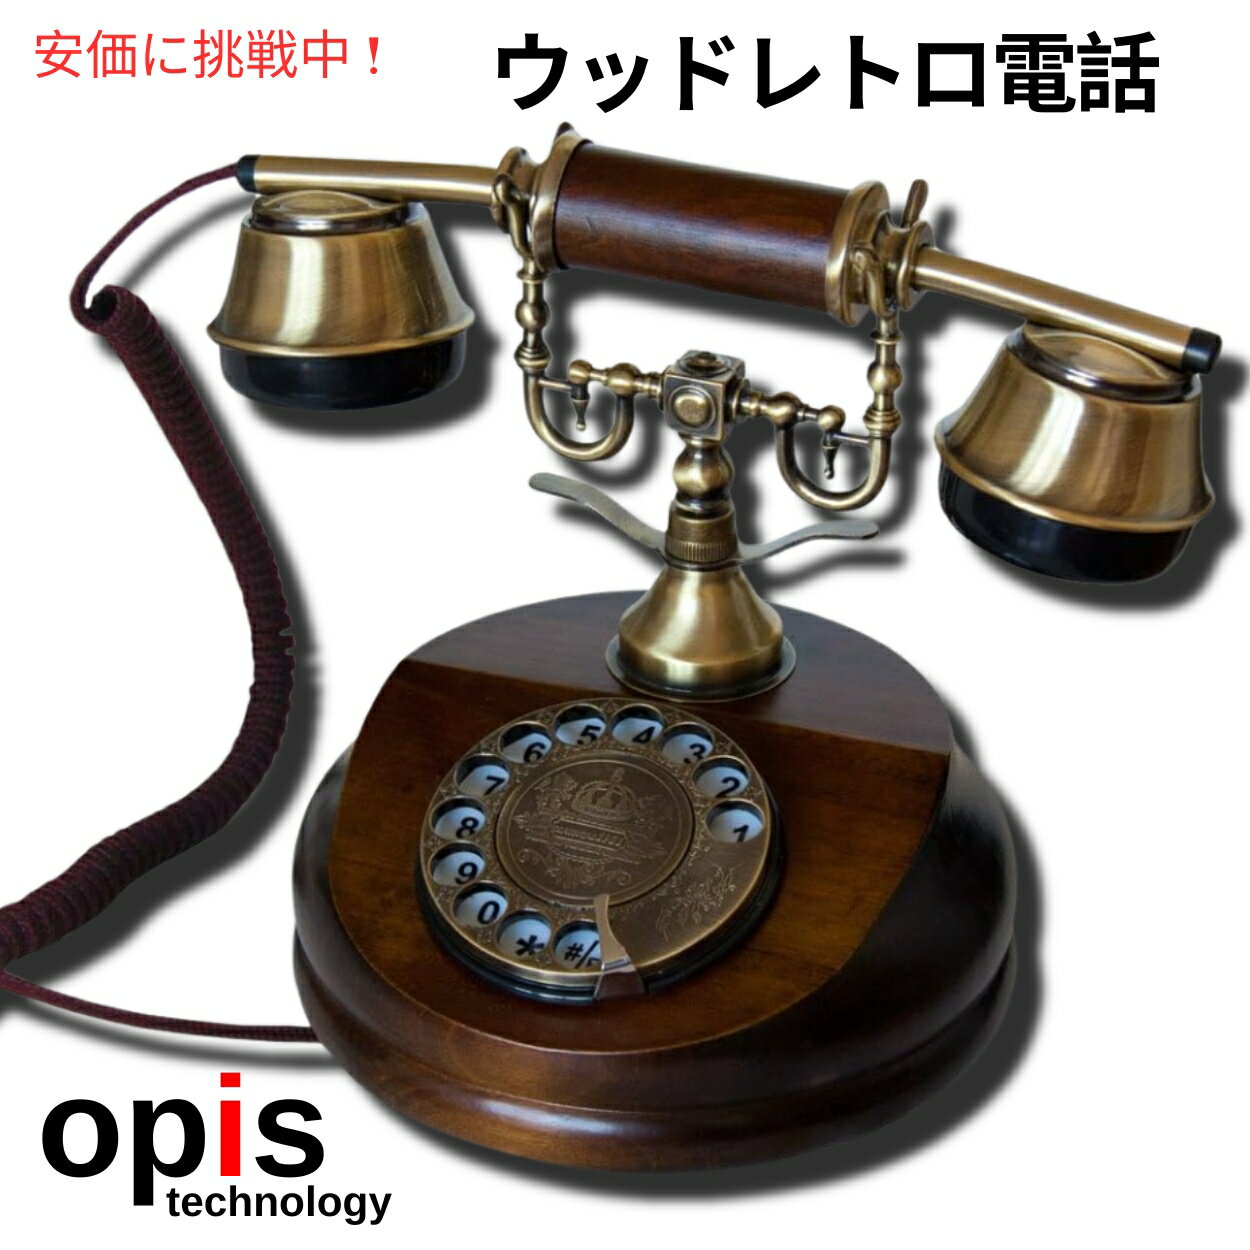 Opis 1921 Cable A レトロ アンティーク ビンテージ 木製固定電話 The Wood Antique Vintage Landline Telephone